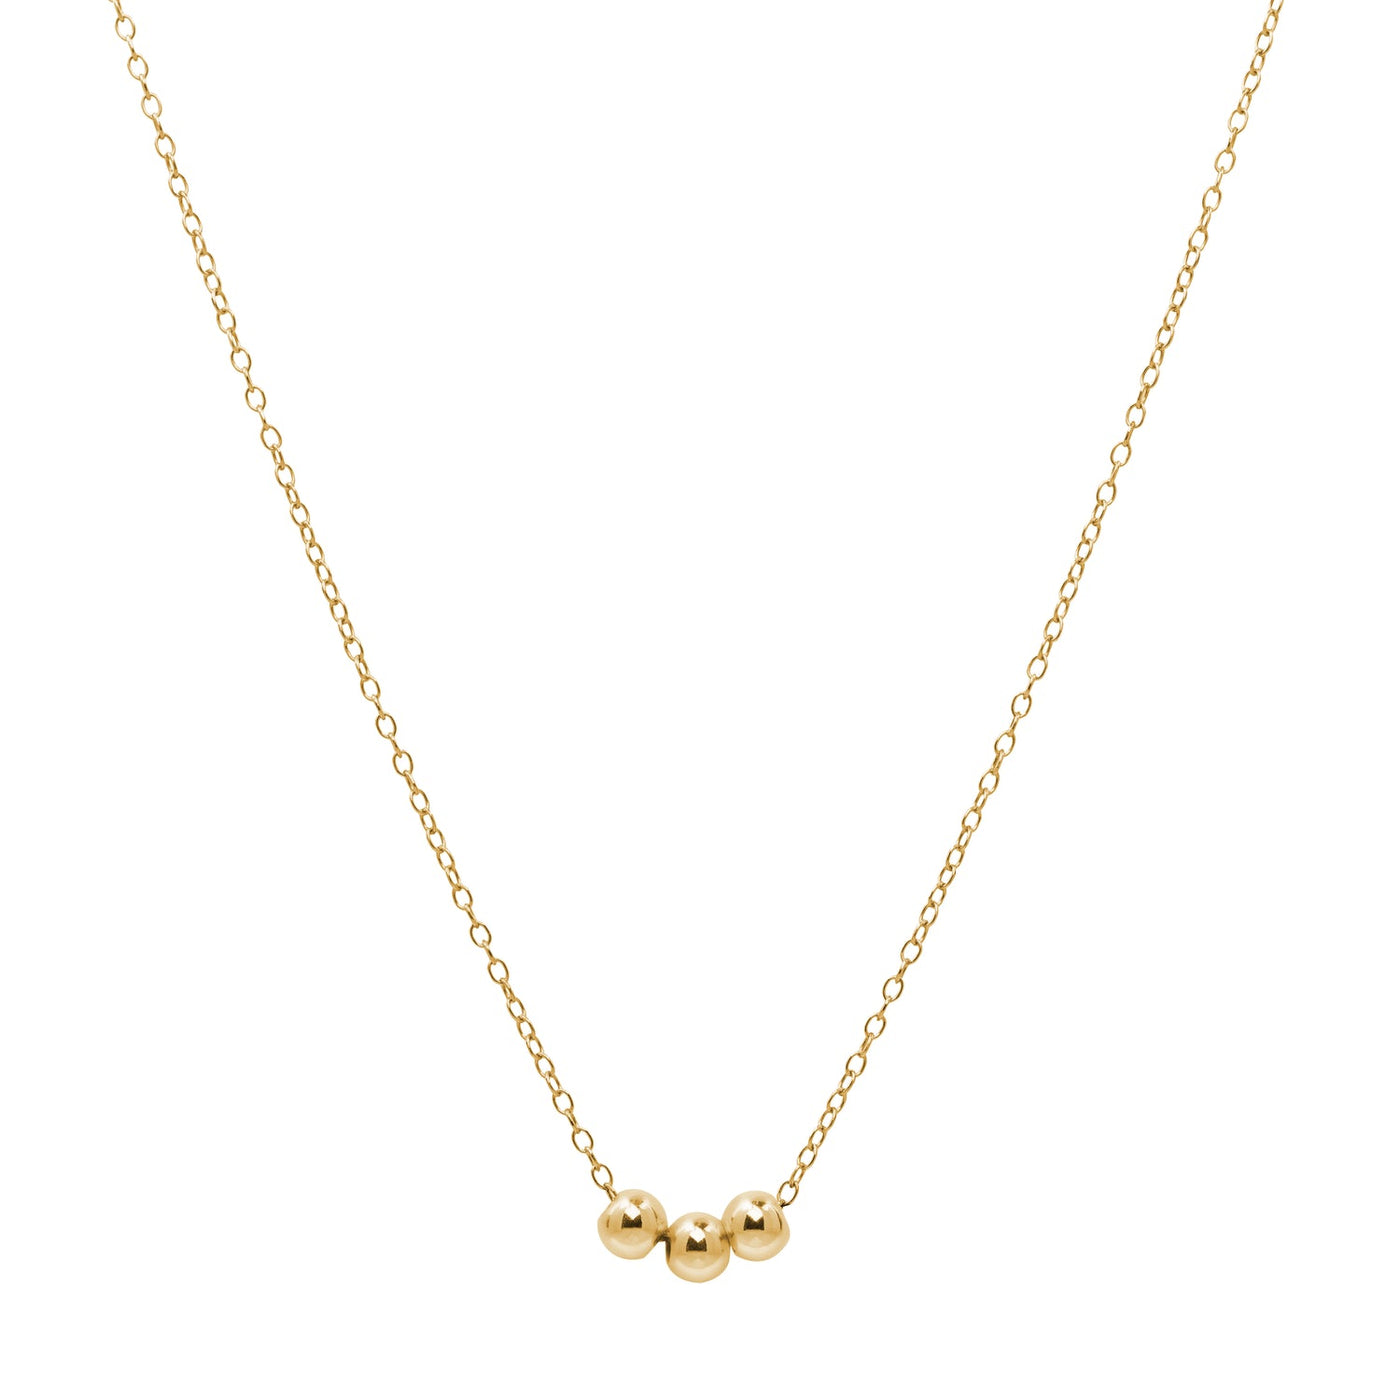 Triple Gold Bead Necklace